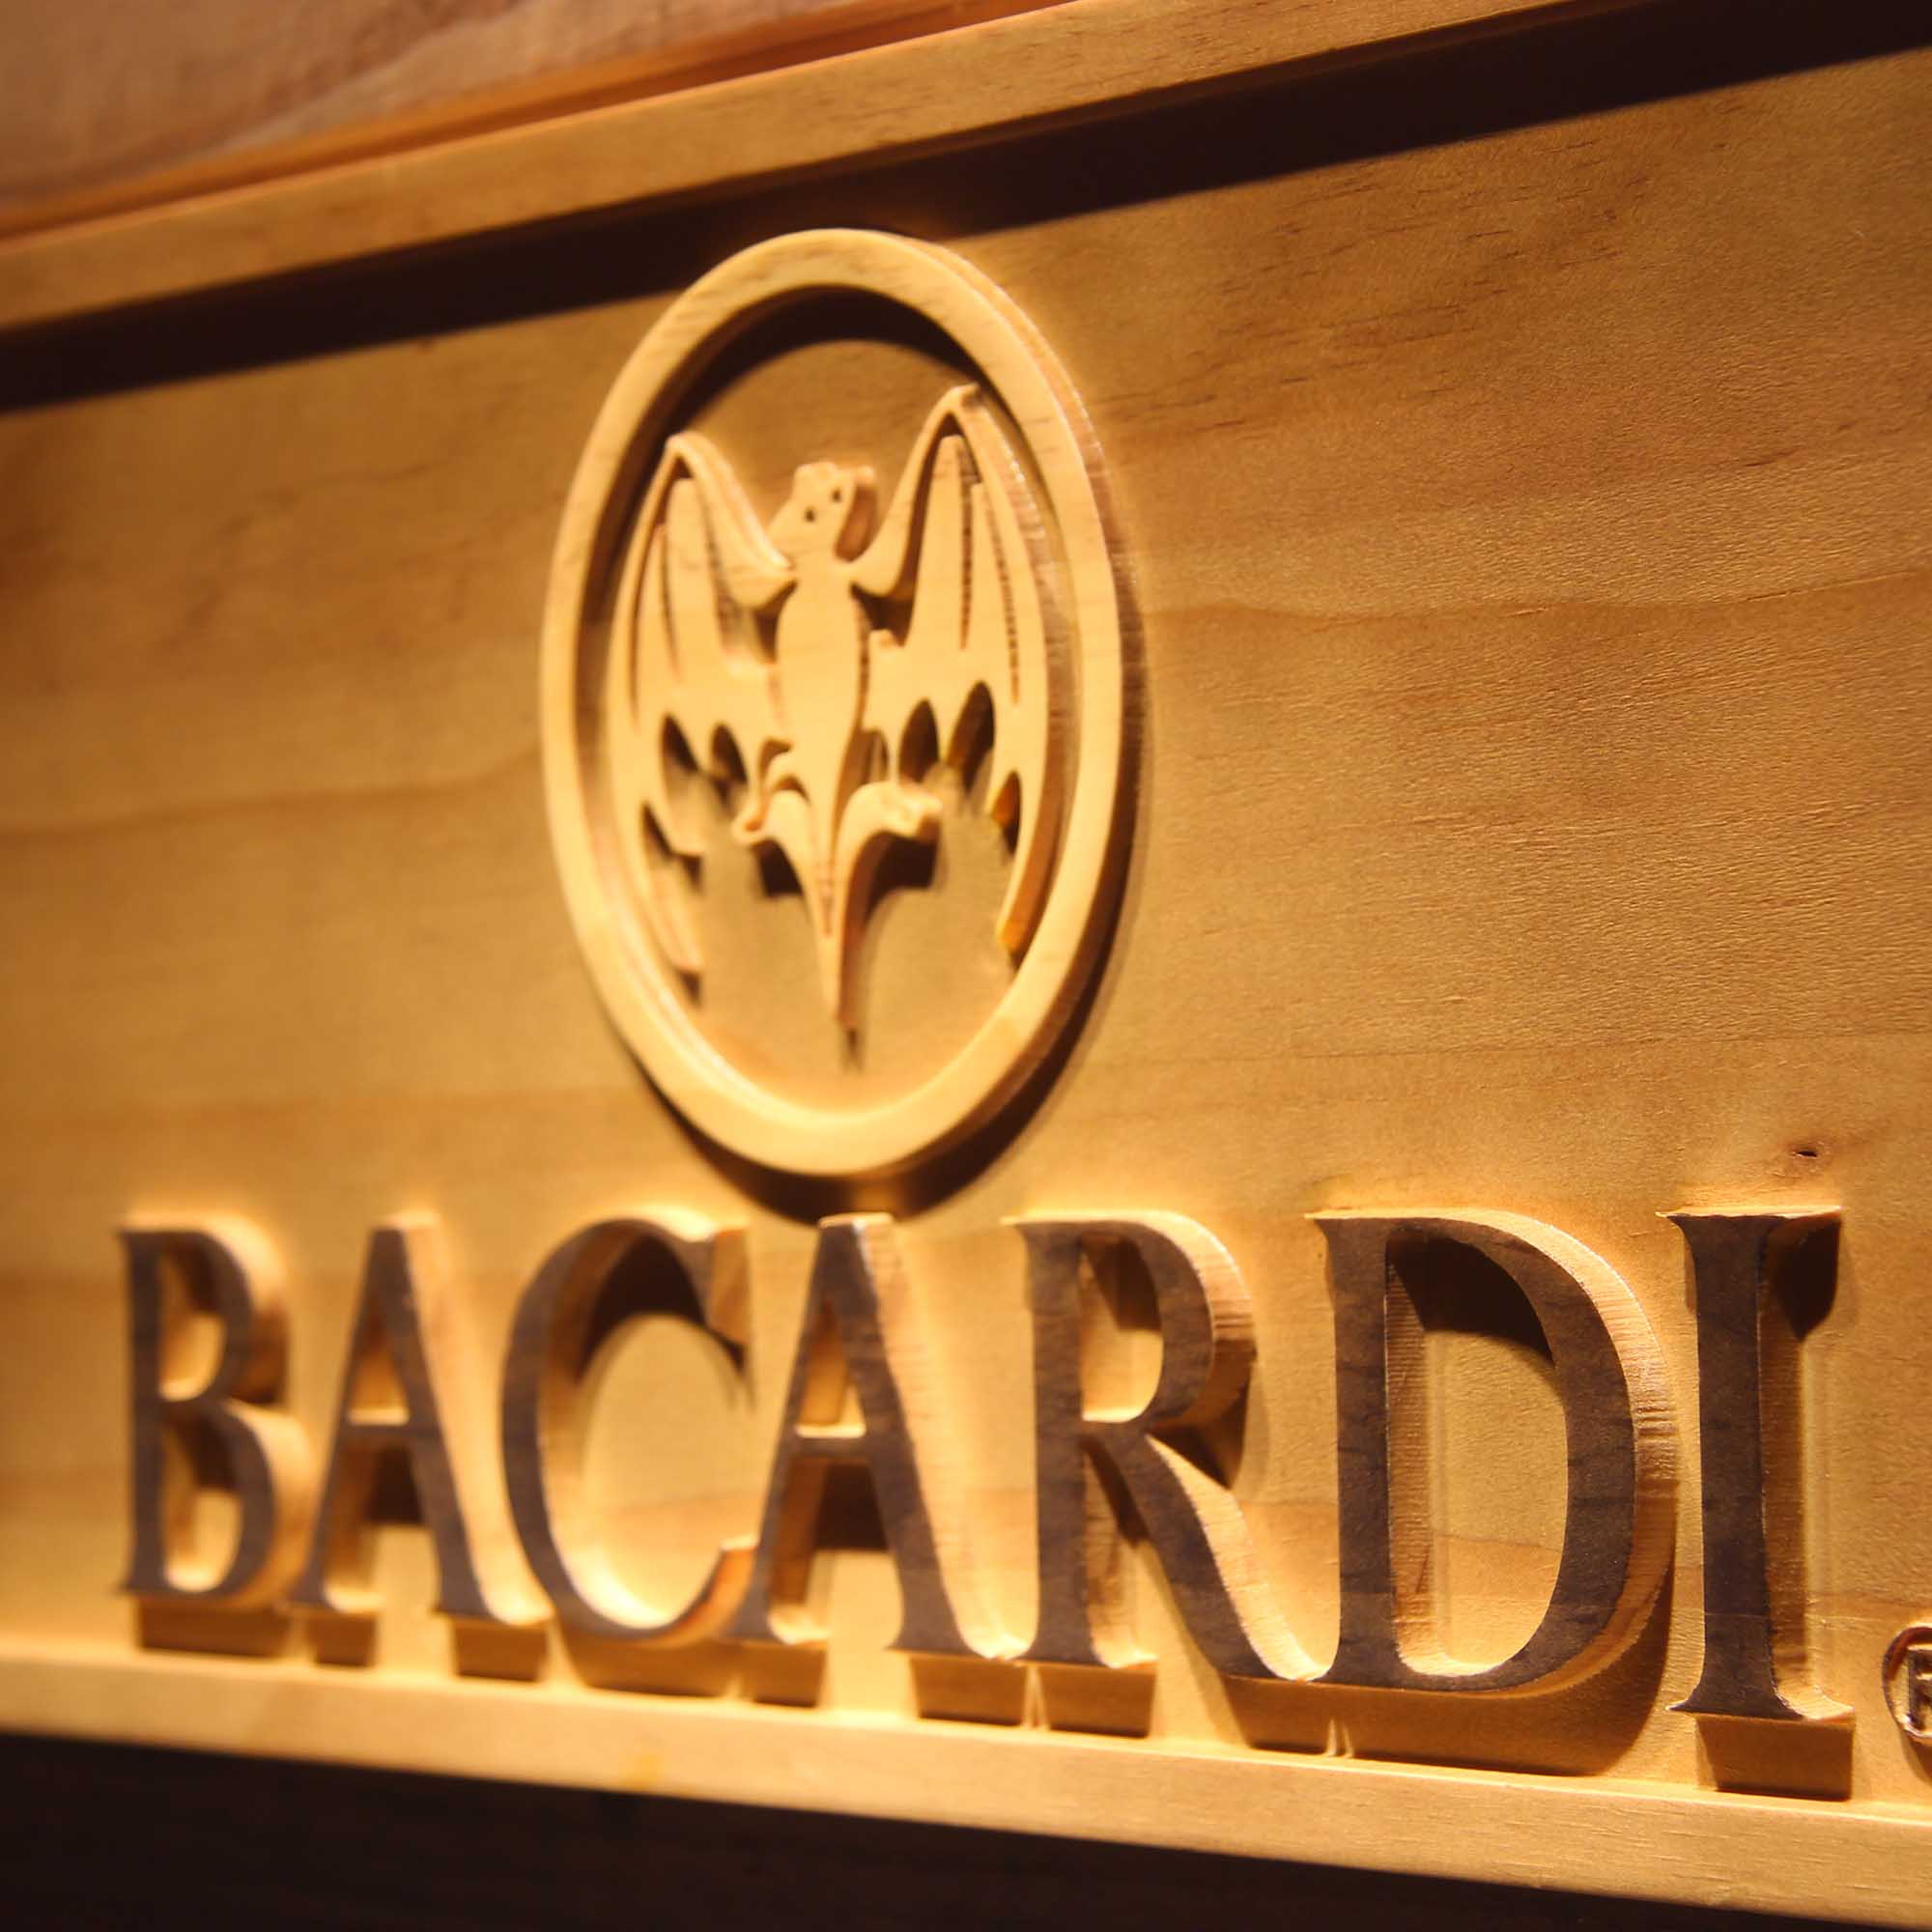 Bacardi Rum 3D Wooden Engrave Sign